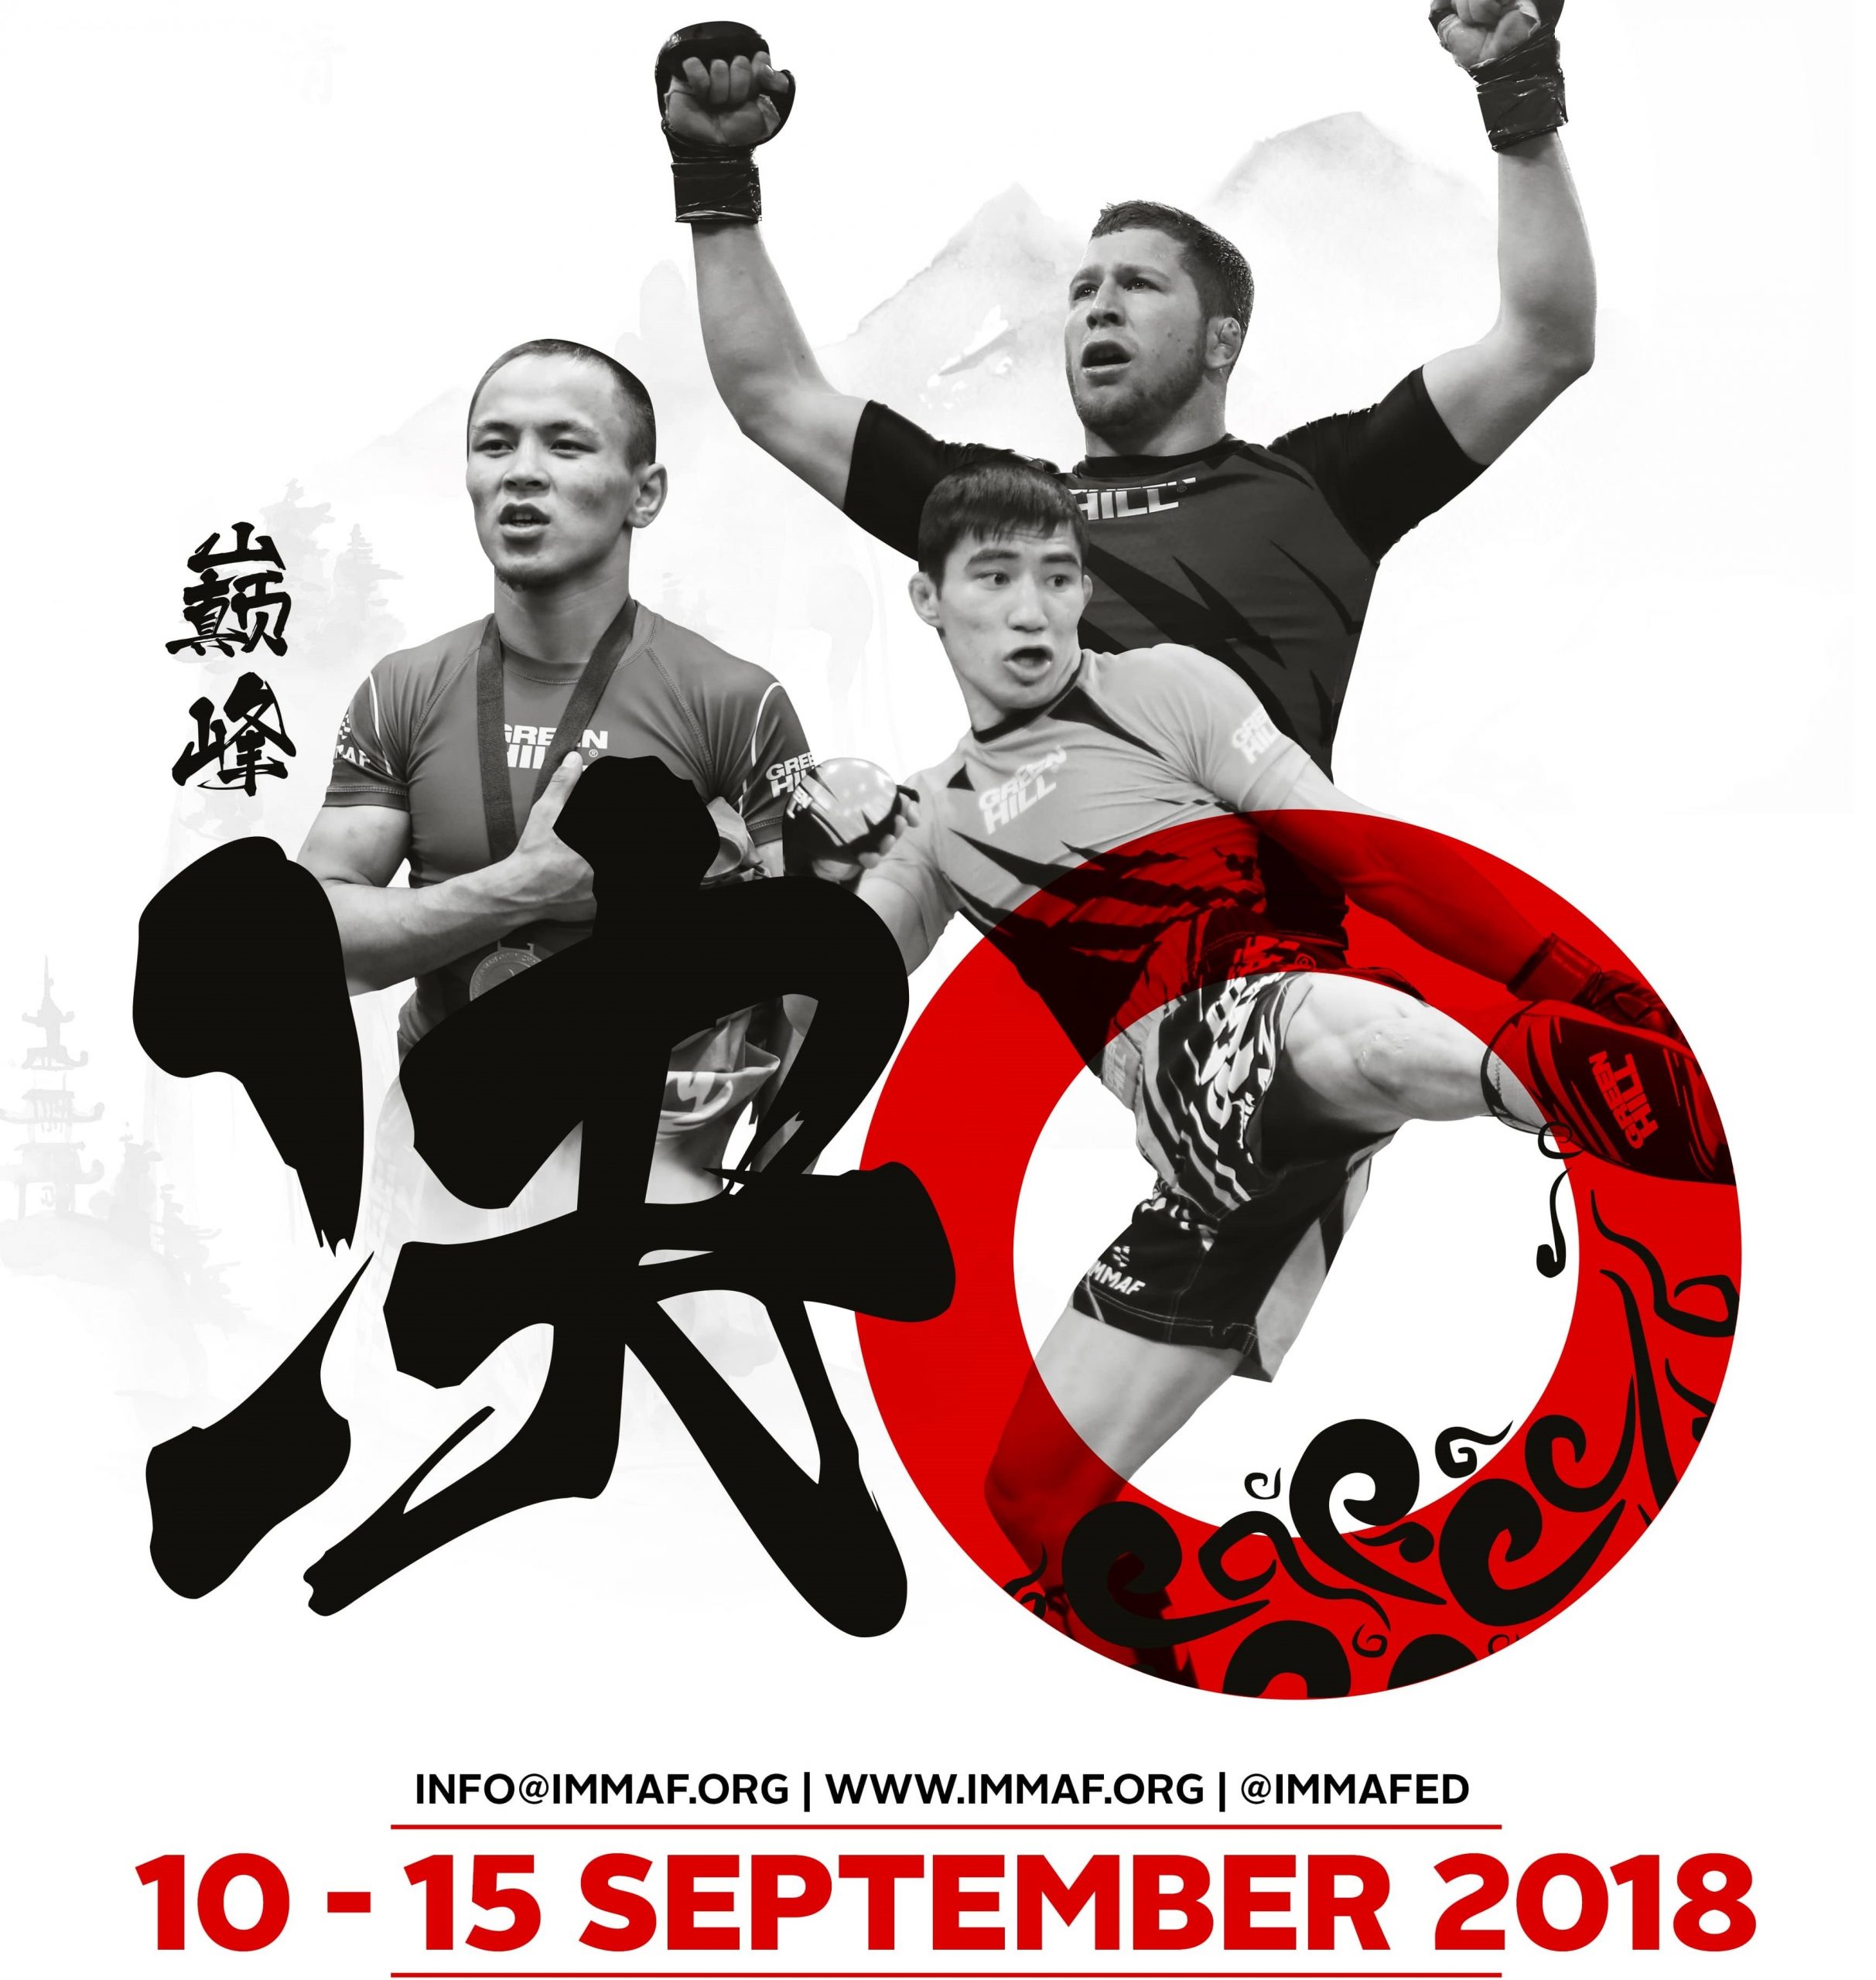 IMMAF CONFIRMS PRIZE MONEY BREAKDOWN FOR 2018 ASIAN OPEN CHAMPIONSHIPS AND JUNIOR WORLD CHAMPIONSHIPS